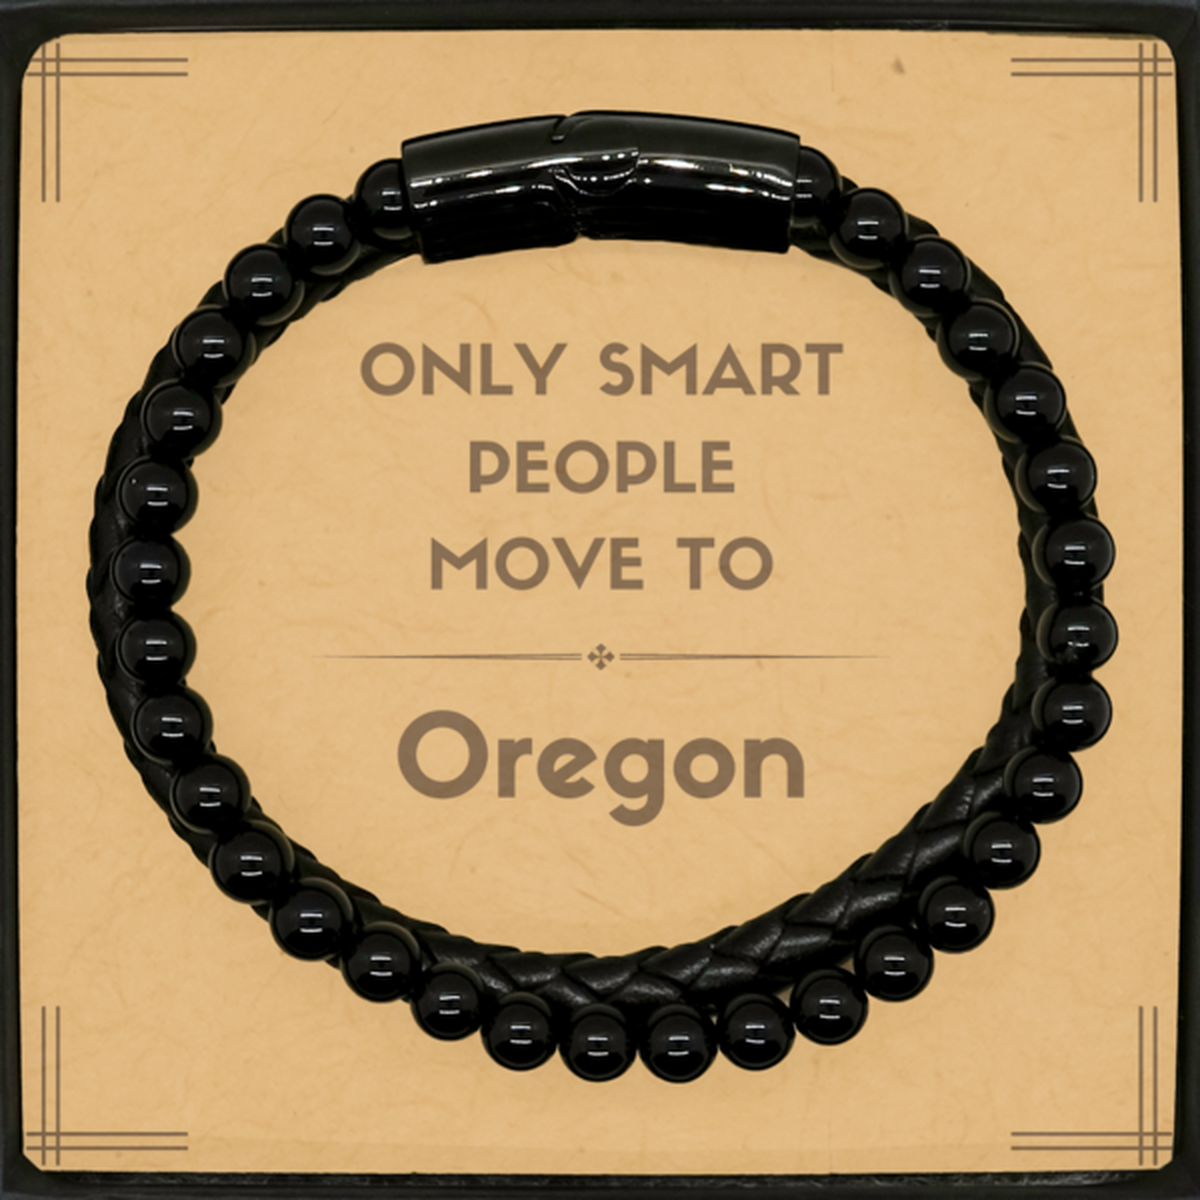 Only smart people move to Oregon Stone Leather Bracelets, Message Card Gifts For Oregon, Move to Oregon Gifts for Friends Coworker Funny Saying Quote